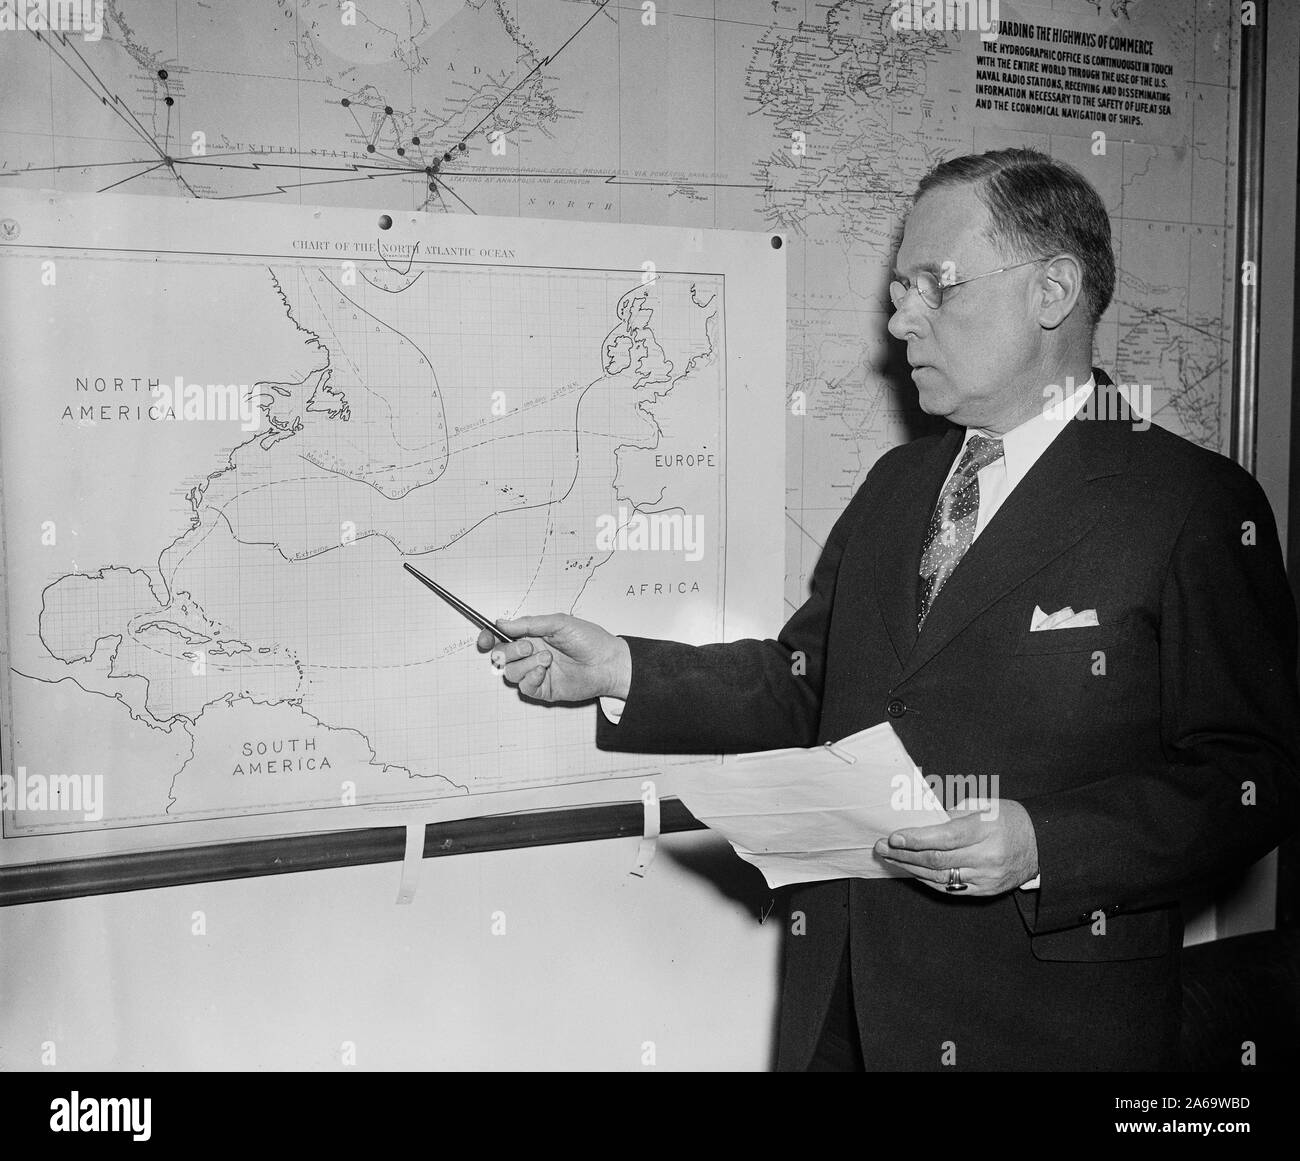 Man with chart showing North Atlantic Ocean ca. 1936 Stock Photo